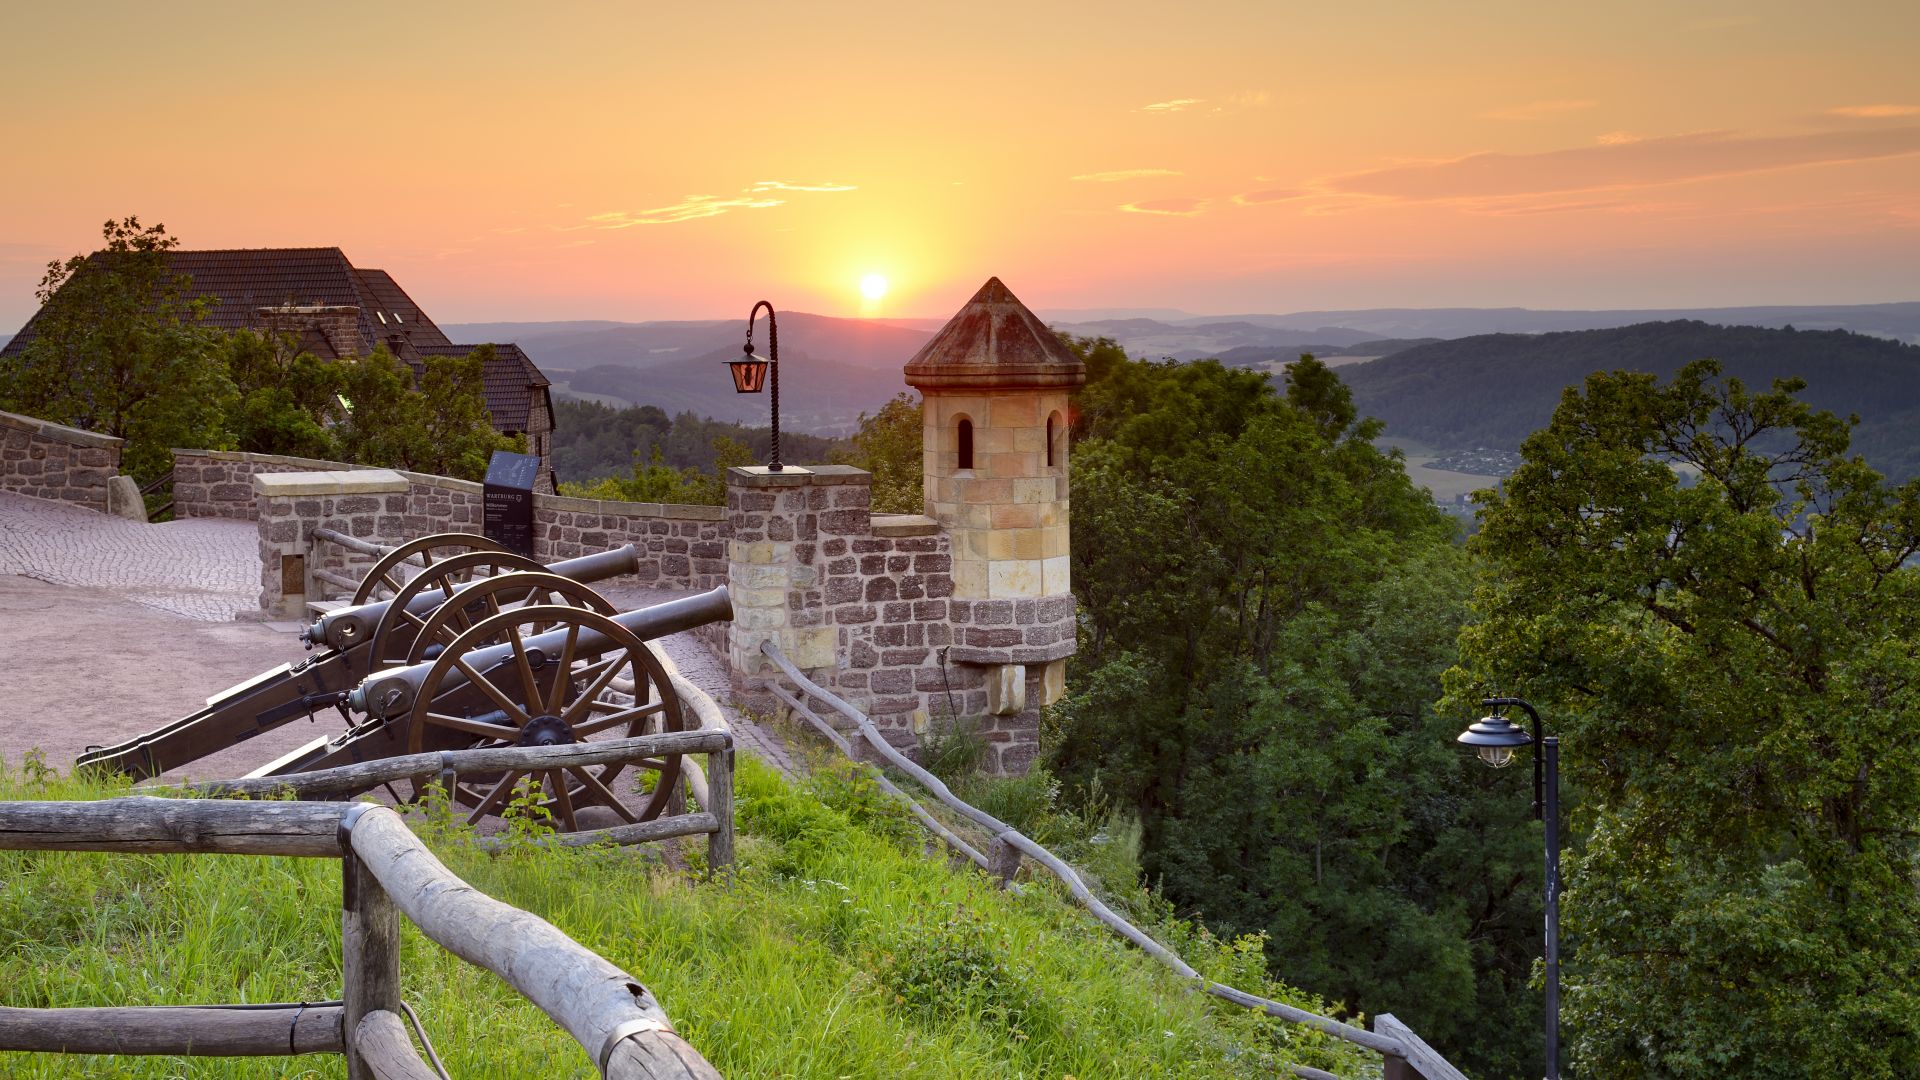 Eisenach: View over two cannons in front of the Wartburg castle to the sunset in the Thuringian Forest